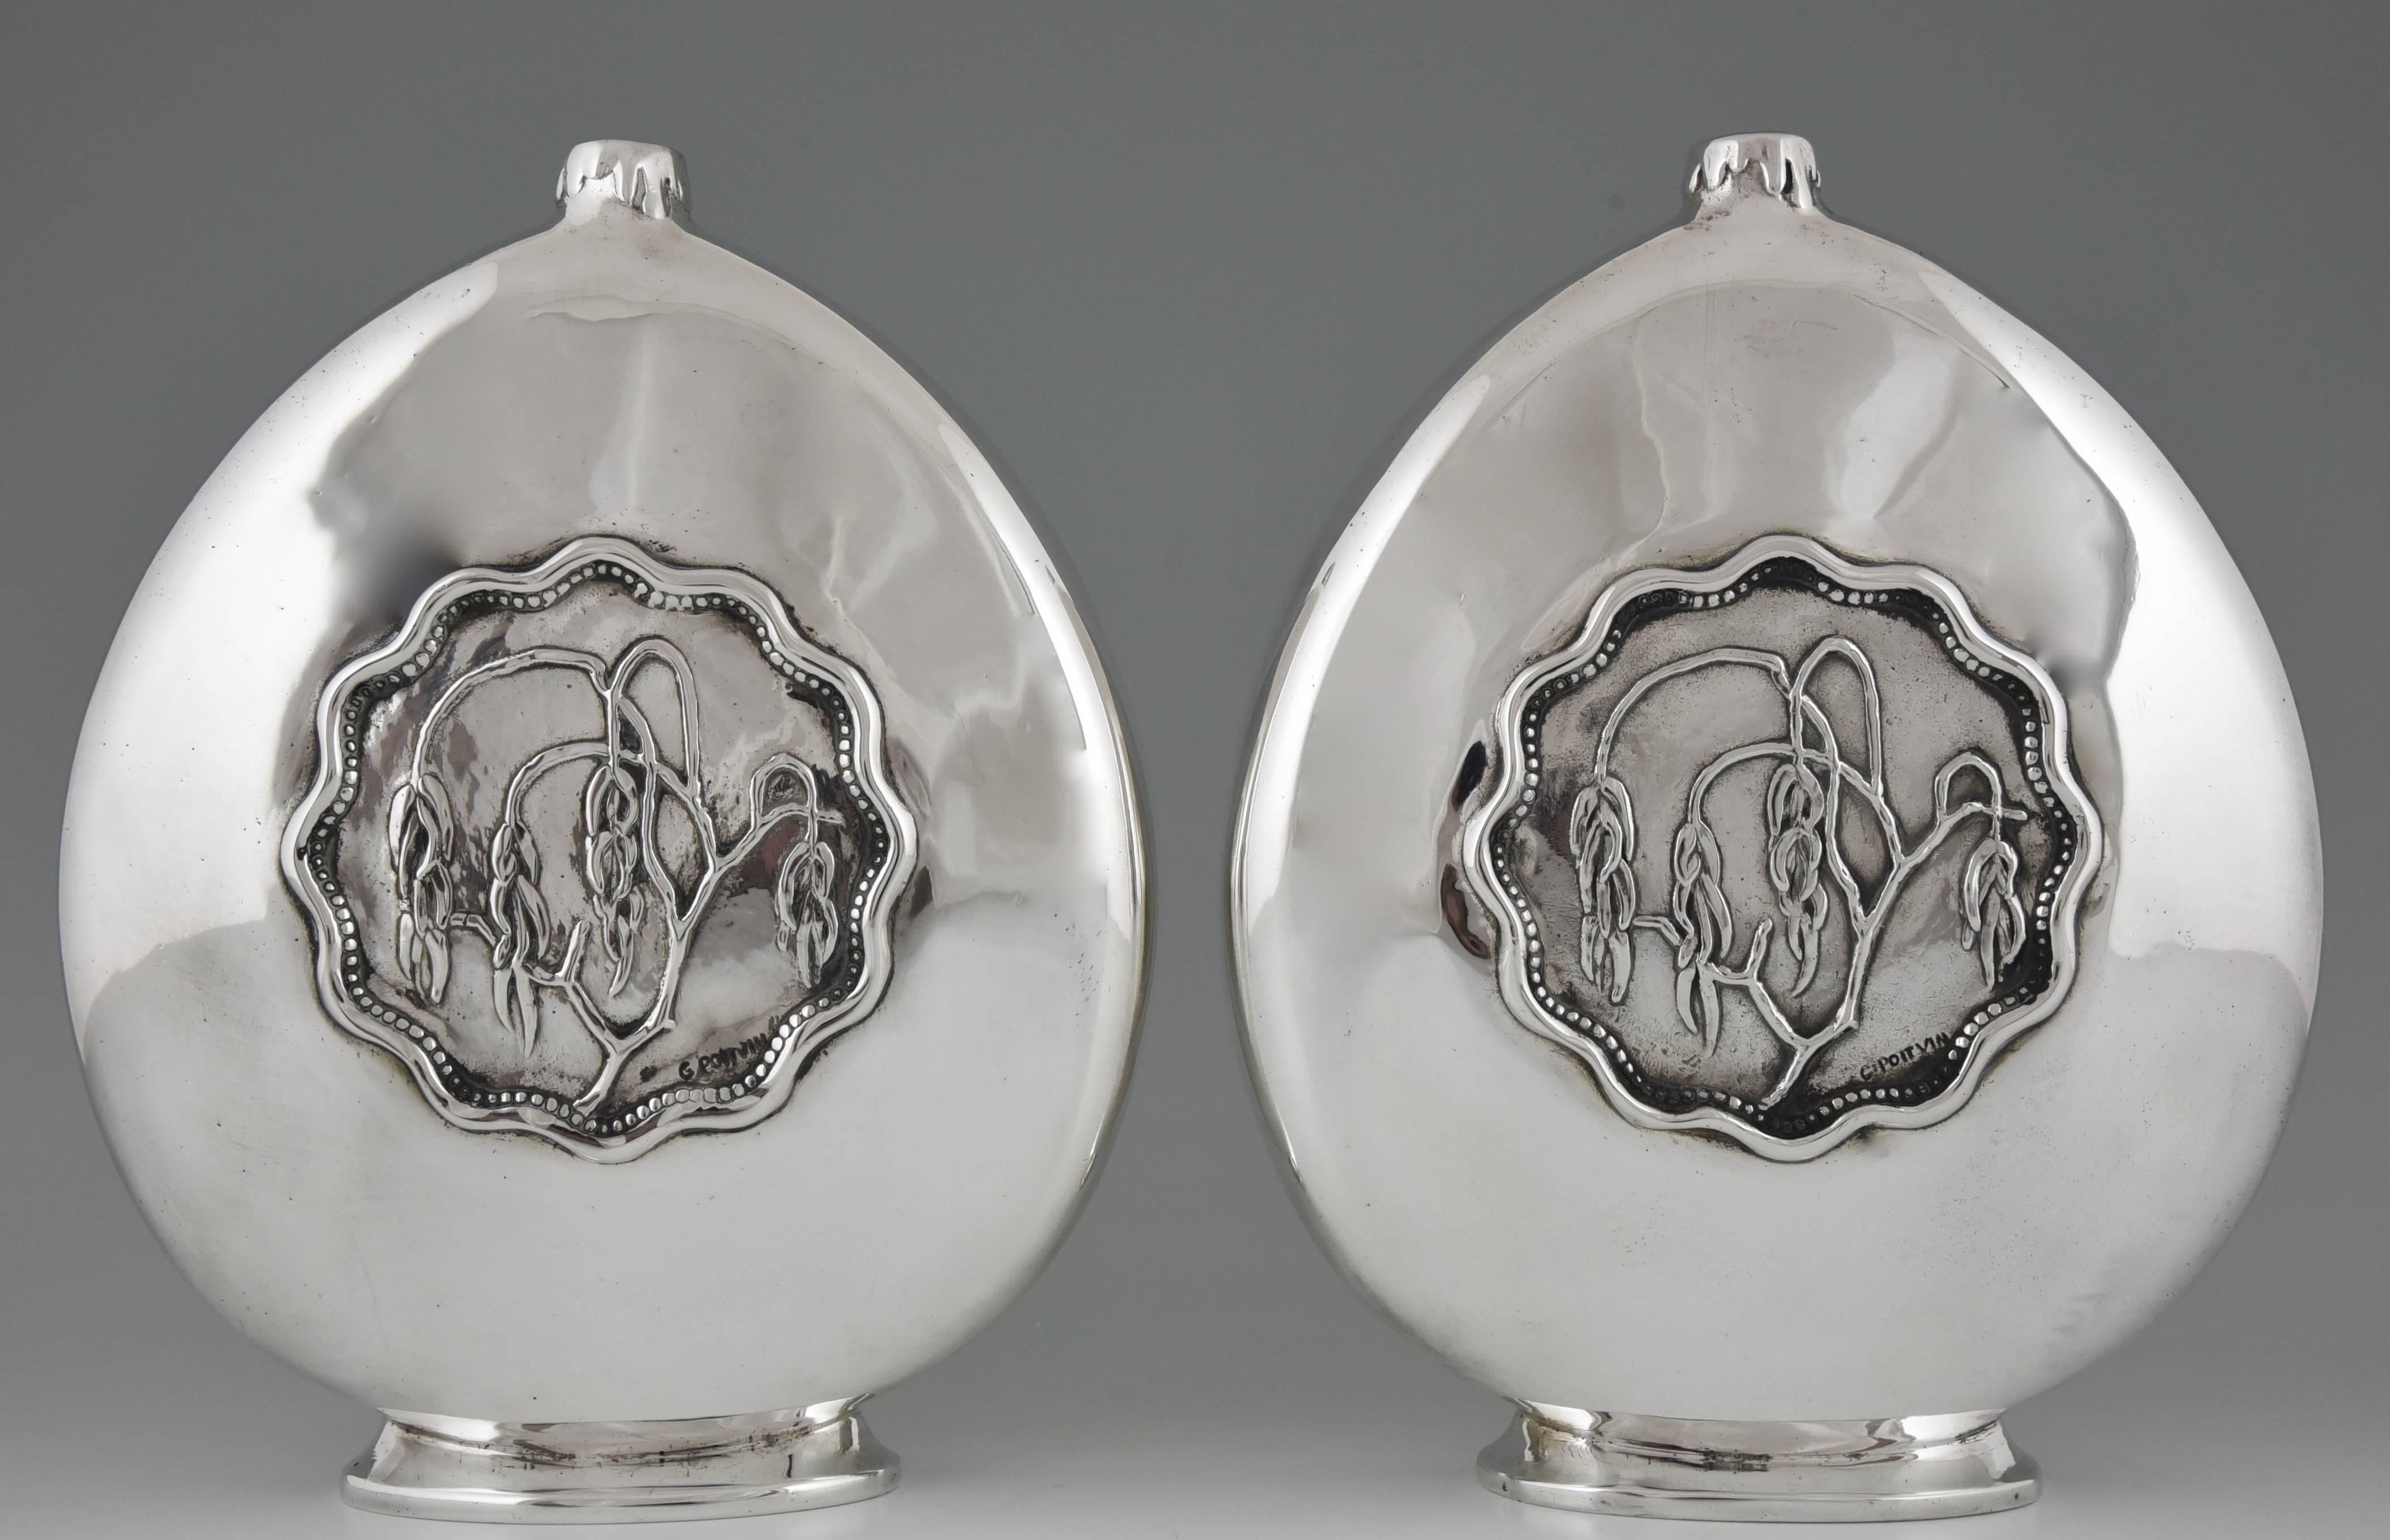 20th Century French Pair of Silvered Bronze Art Deco Vases by G. Poitvin 1930